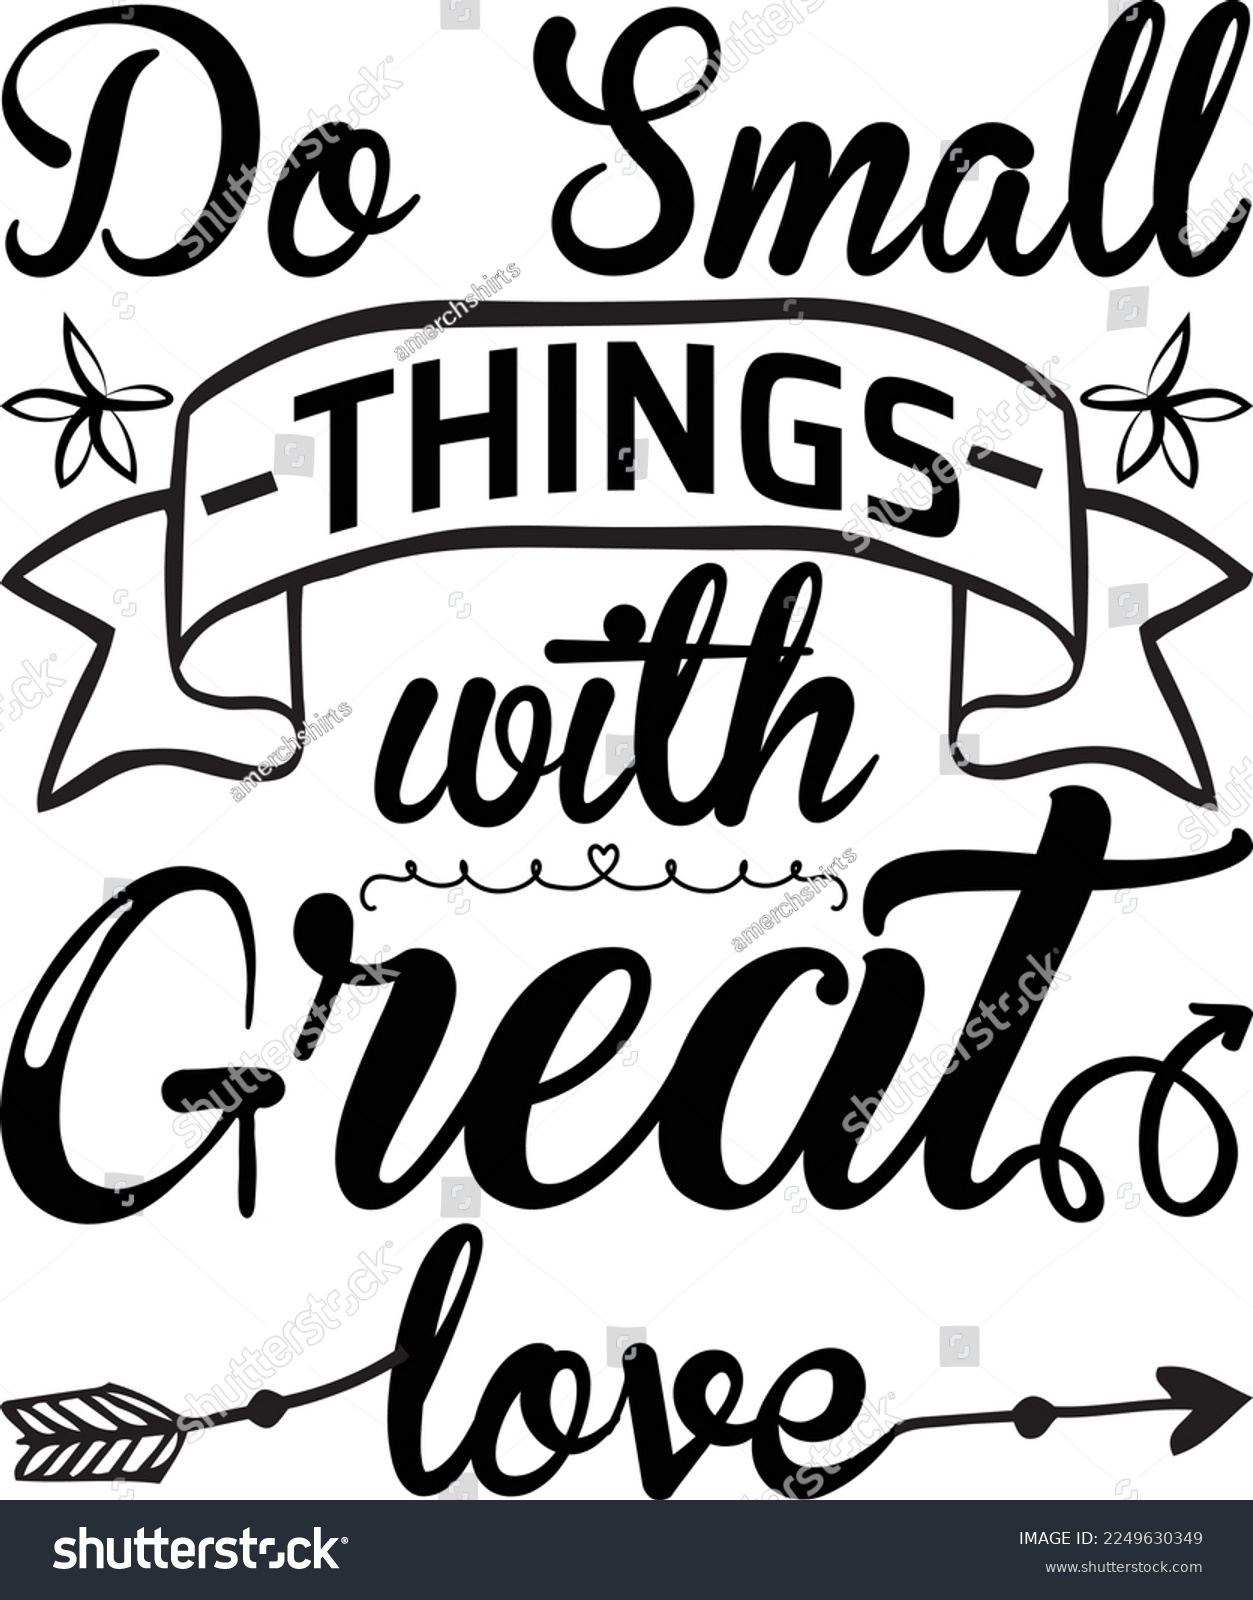 SVG of Do small things with great love, Inspirational t shirt, Motivational SVG, Motivation, Motivational SVG Bundle, Inspirational SVG, Positive SVG, Cut File, T-Shirts svg